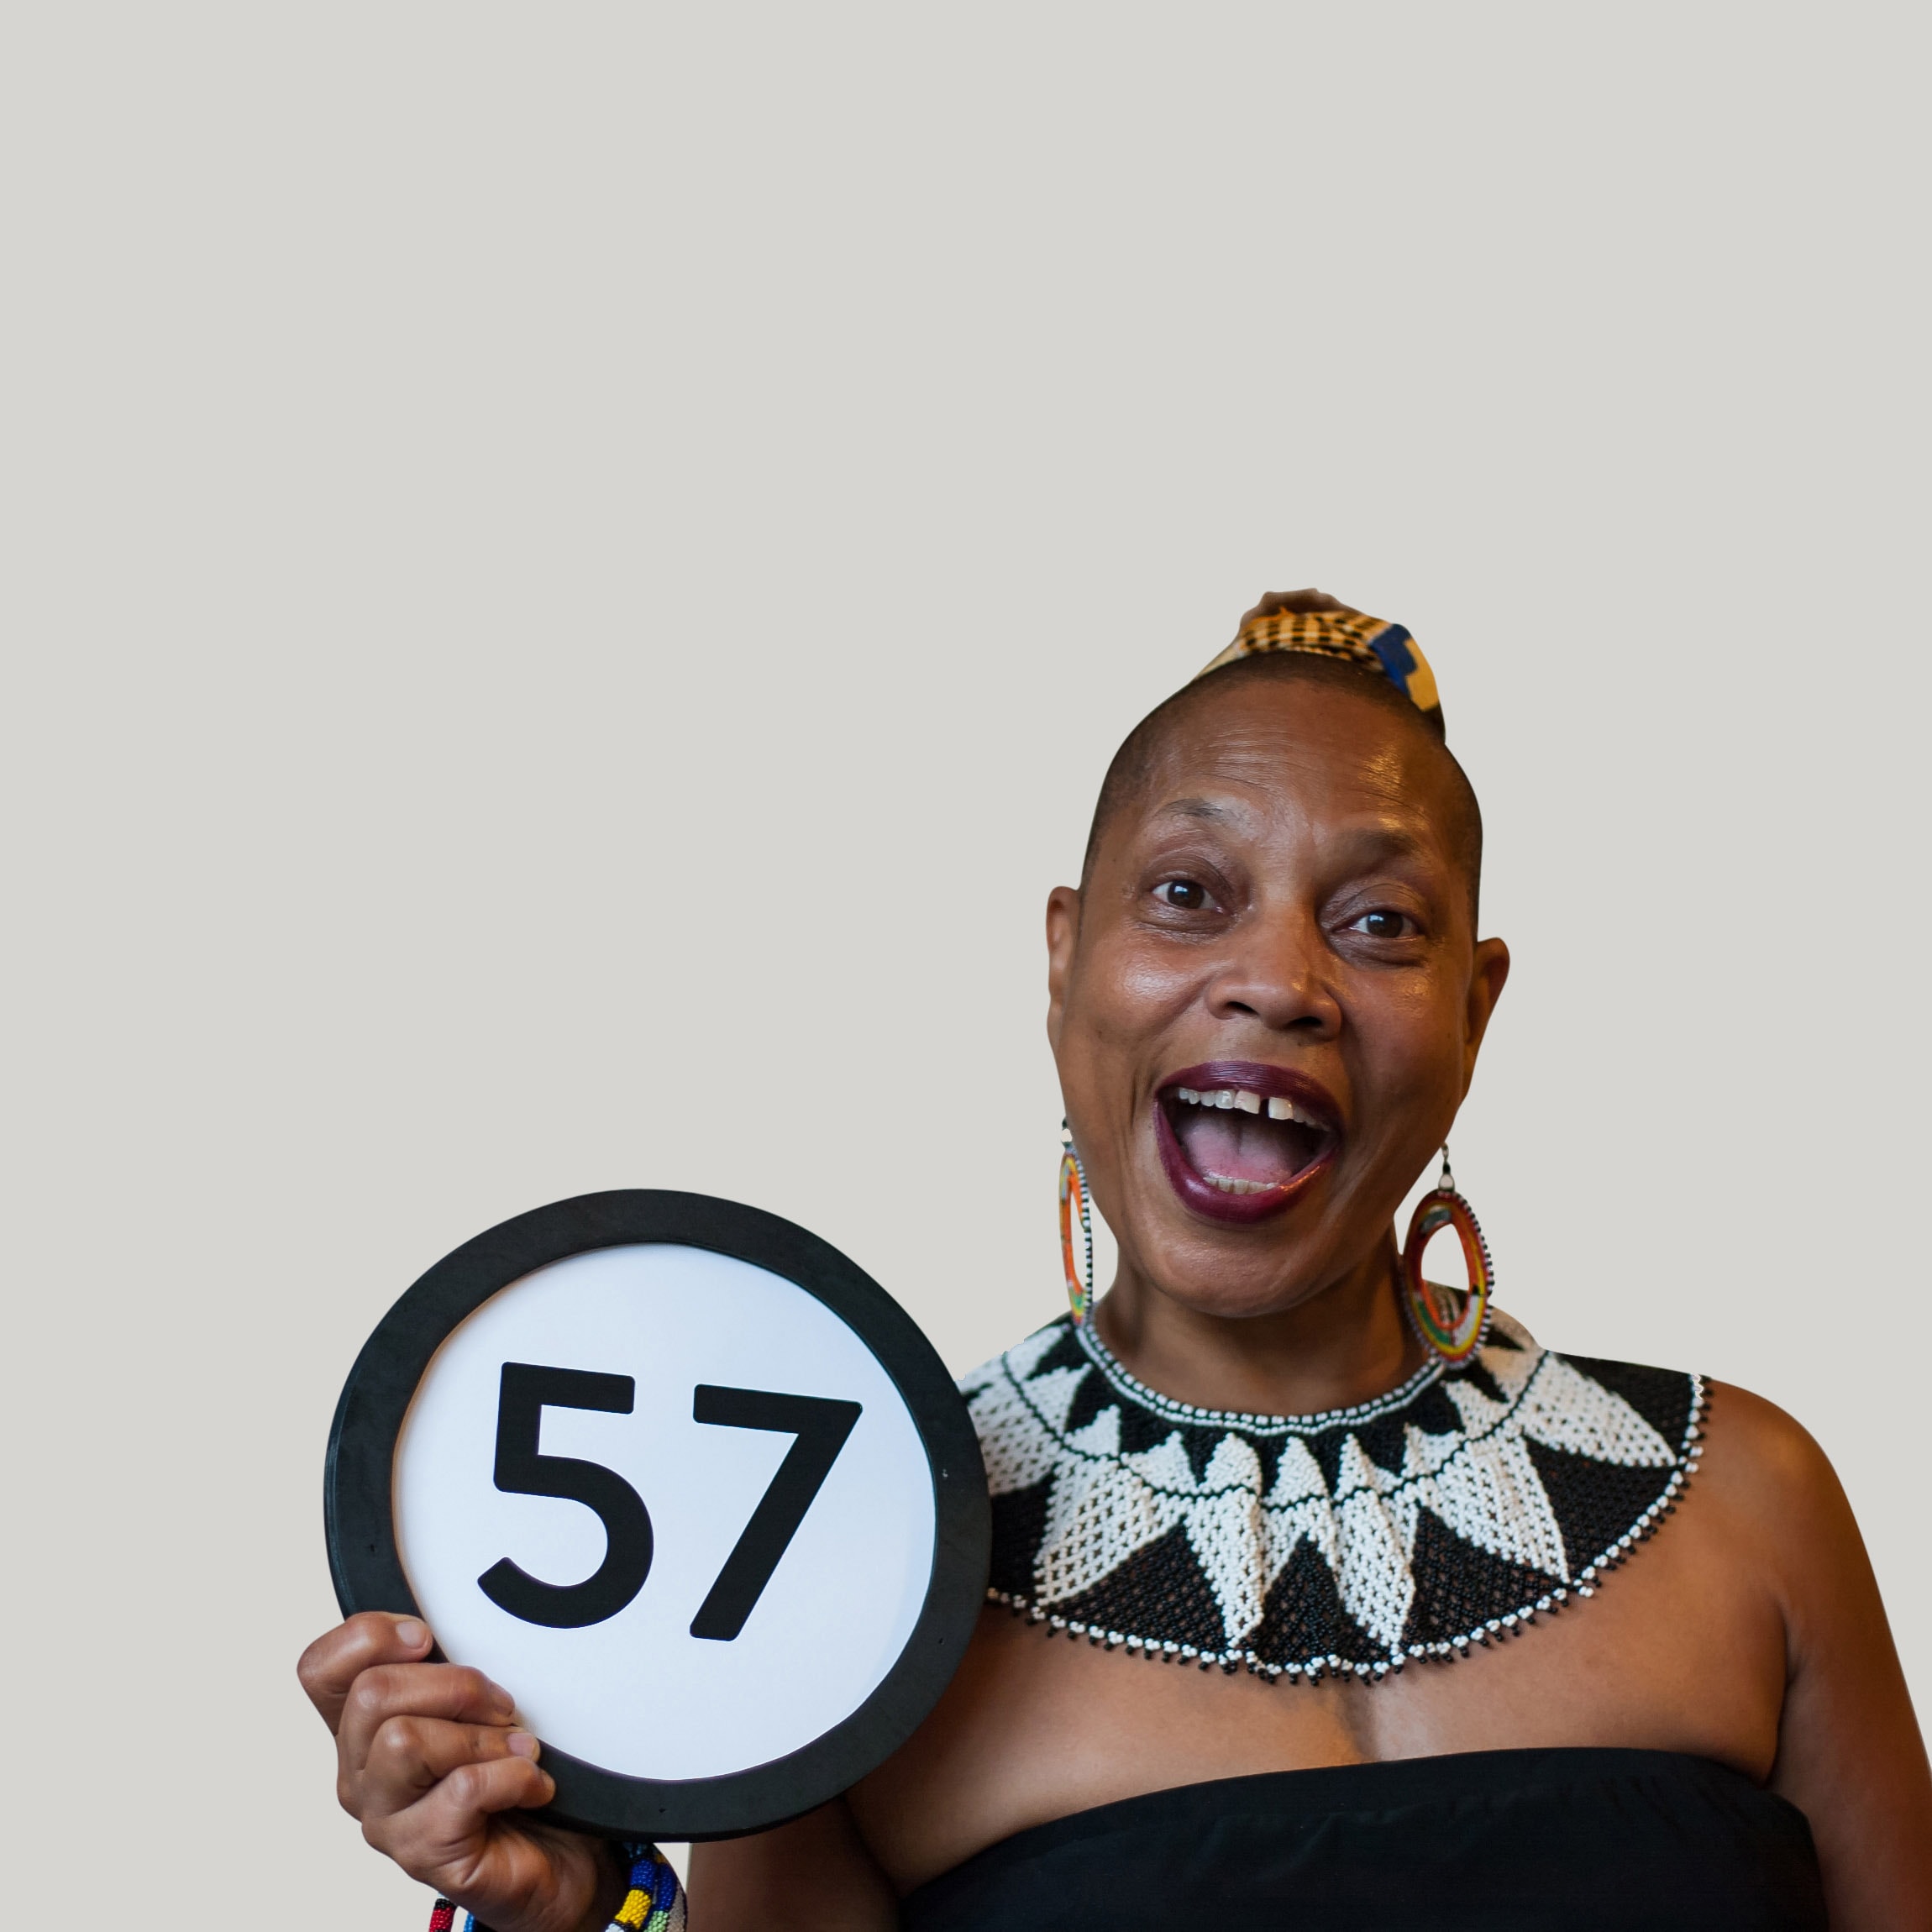 57 year old woman wears a black and white beaded collar, shoulderless dress, an open mouth smile. And she looks into the camera. Her head is shaved, lipstick is dark magenta, and she is thrilled to be holding a token with the number 57 on it. This digital image is part of the 1 to Infinity portrait photography series by Danny Goldfield.